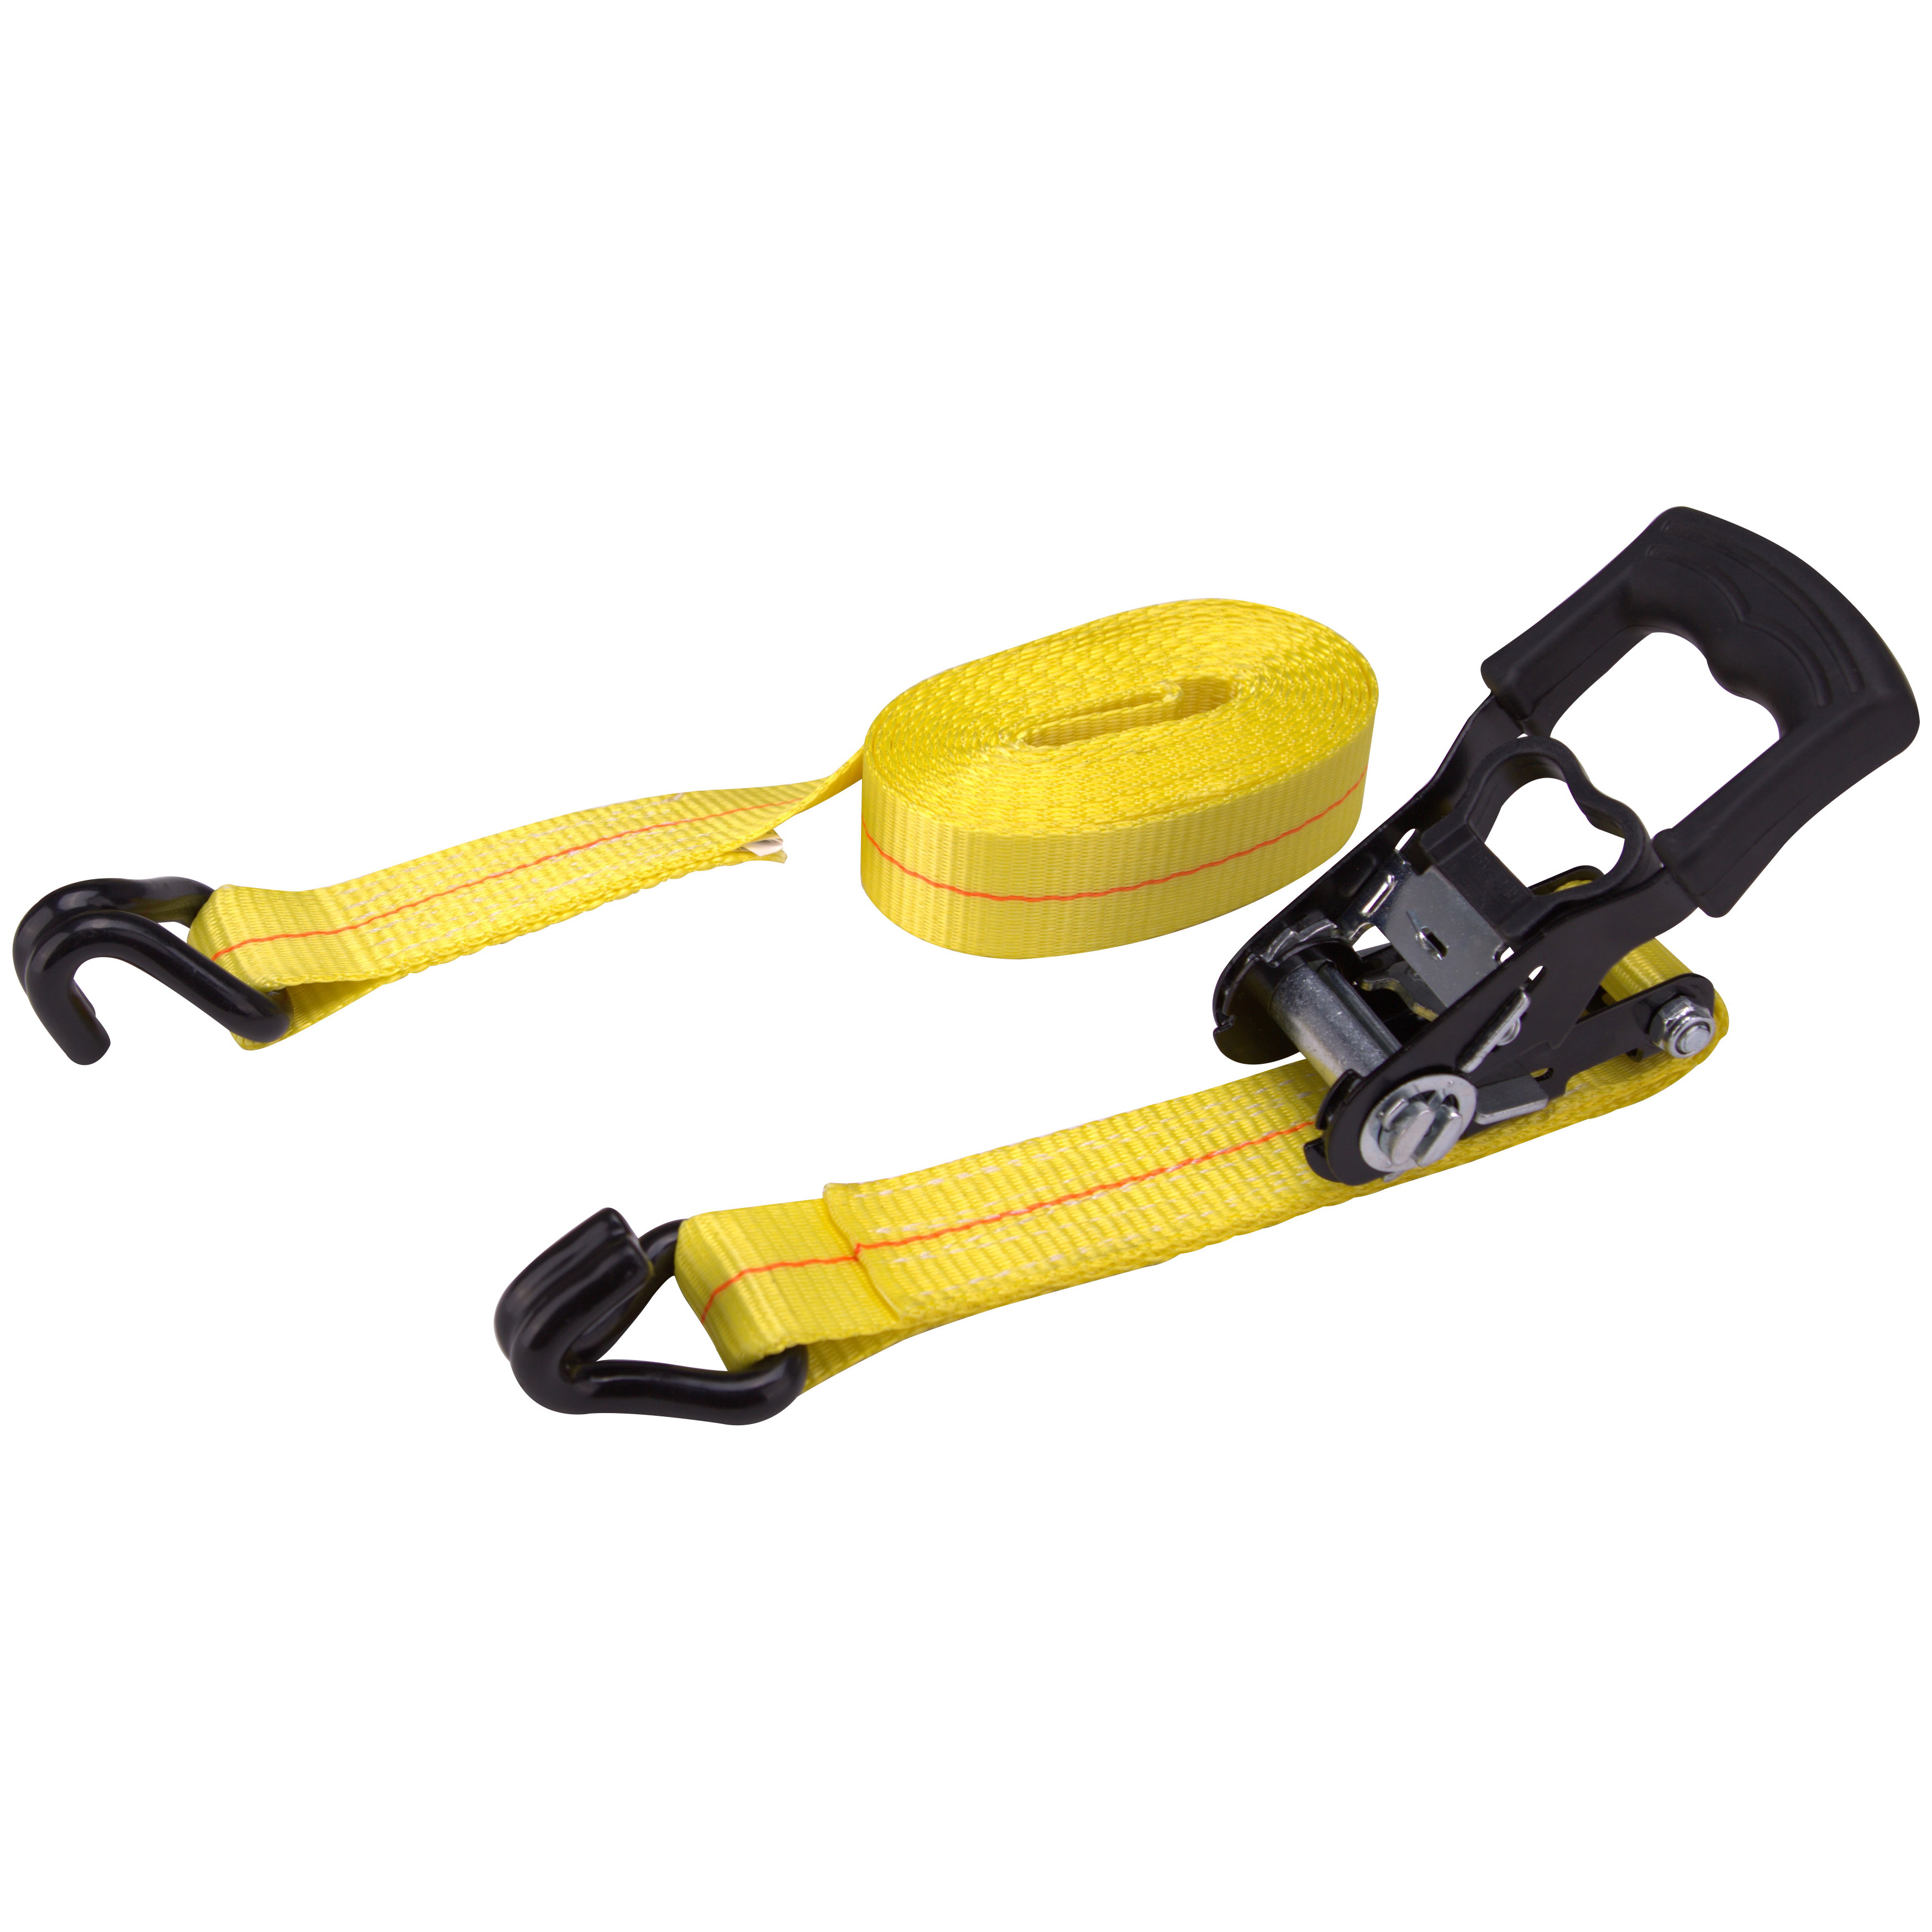 FH64071 Tie-Down, 1-1/2 in W, 15 ft L, Polyester Webbing, Metal Ratchet, Yellow, 1666 lb, Steel End Fitting